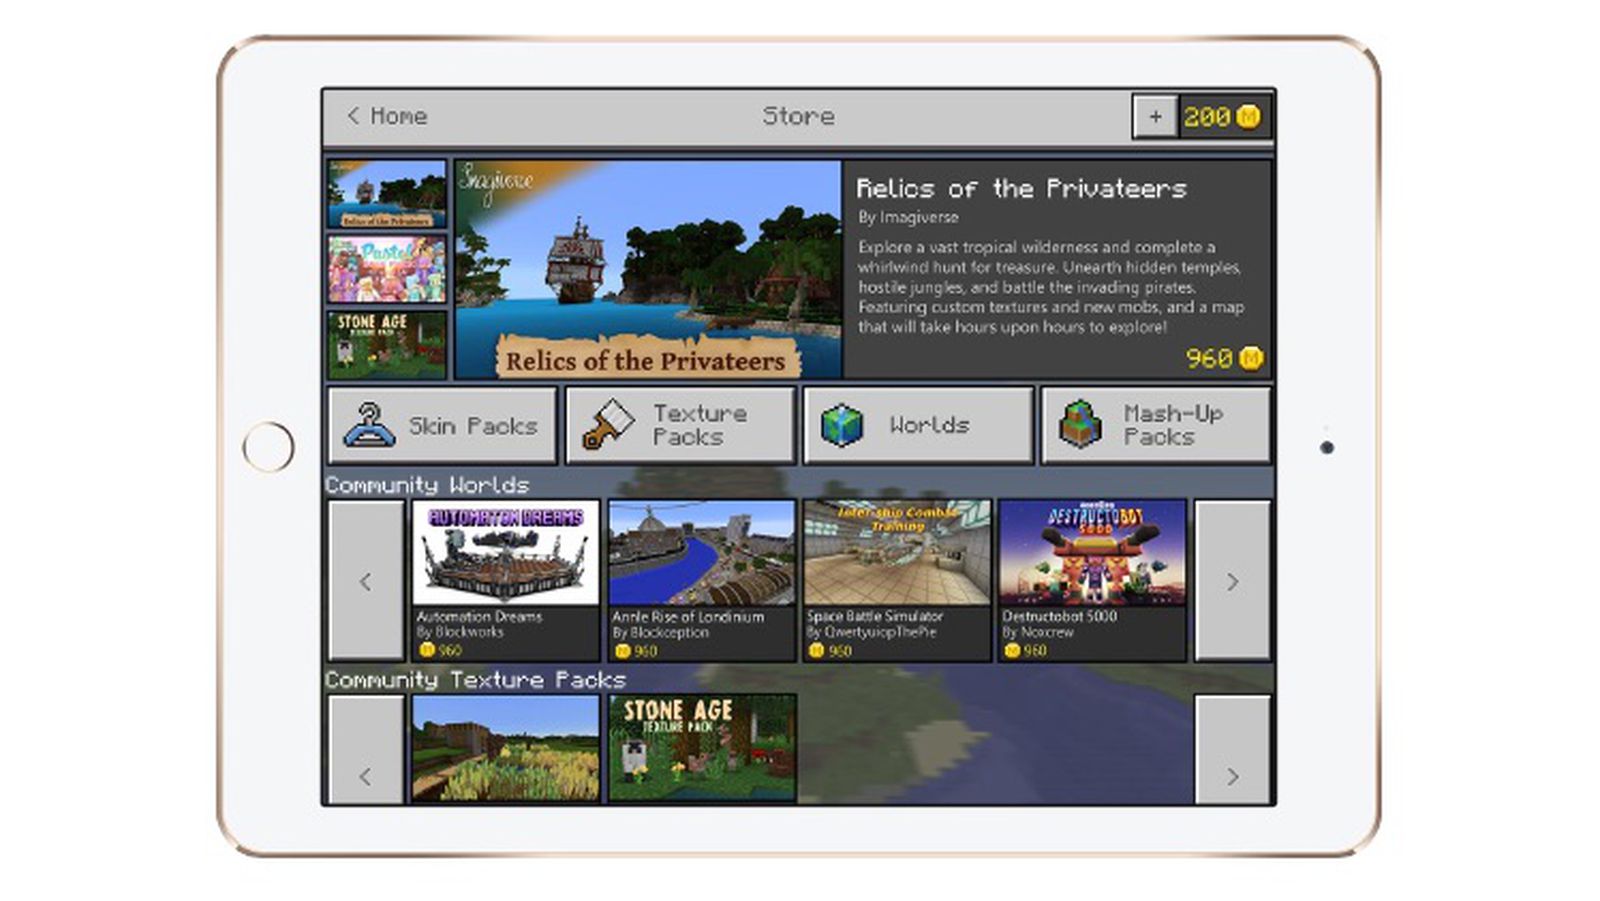 Celebrating the past and future of Minecraft: Pocket Edition